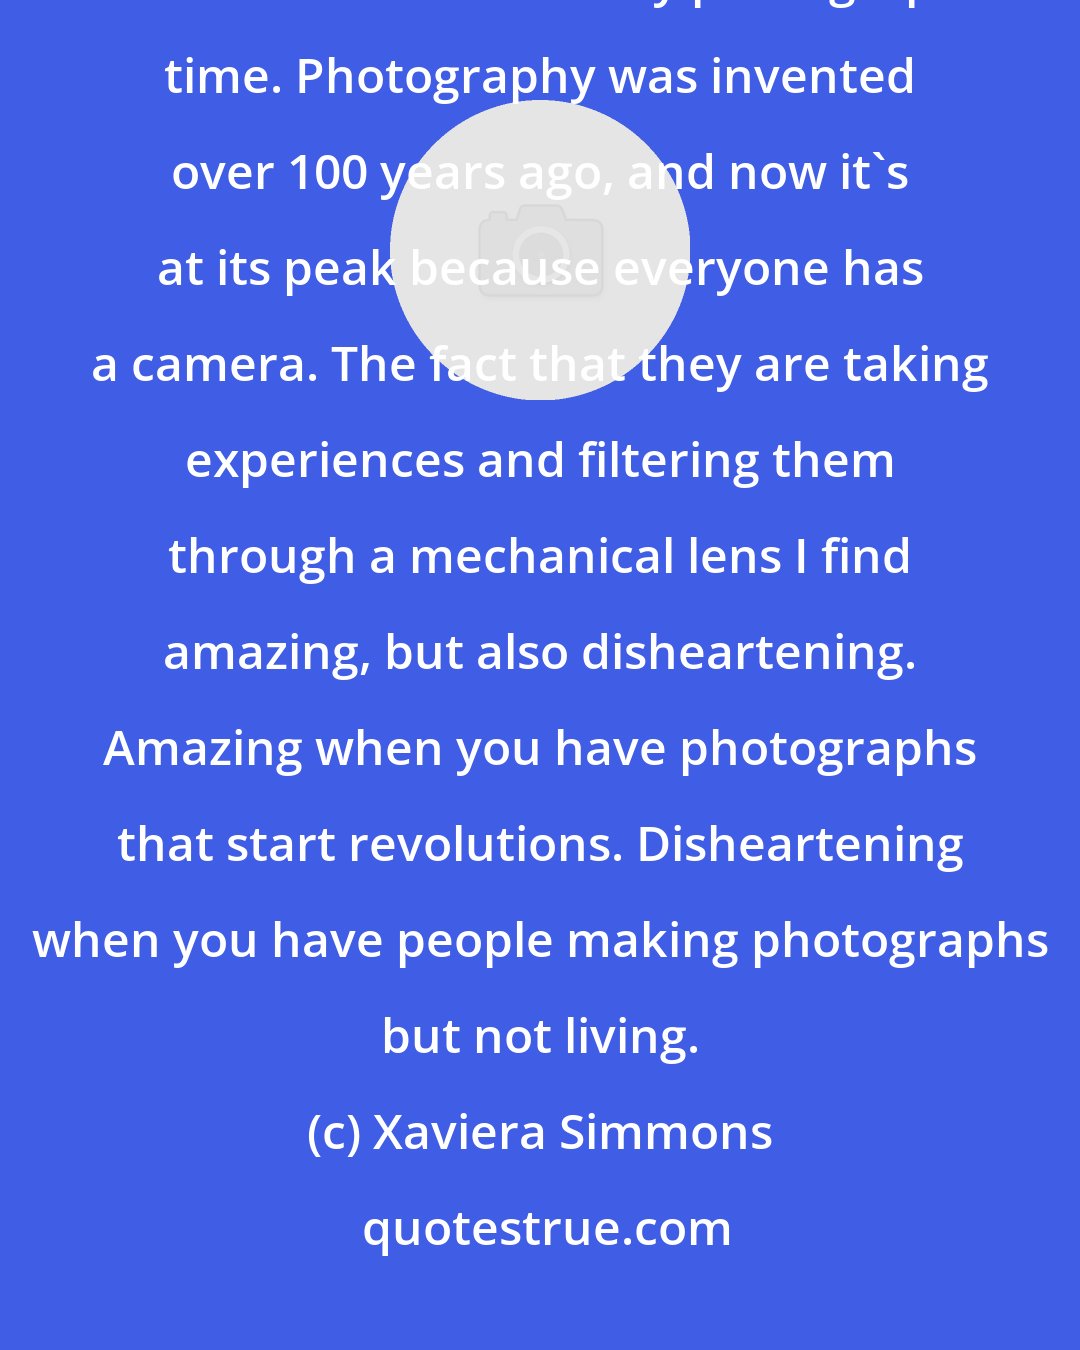 Xaviera Simmons: During my performances, I don't like folks to take pictures because I feel that we live in a very photographic time. Photography was invented over 100 years ago, and now it's at its peak because everyone has a camera. The fact that they are taking experiences and filtering them through a mechanical lens I find amazing, but also disheartening. Amazing when you have photographs that start revolutions. Disheartening when you have people making photographs but not living.